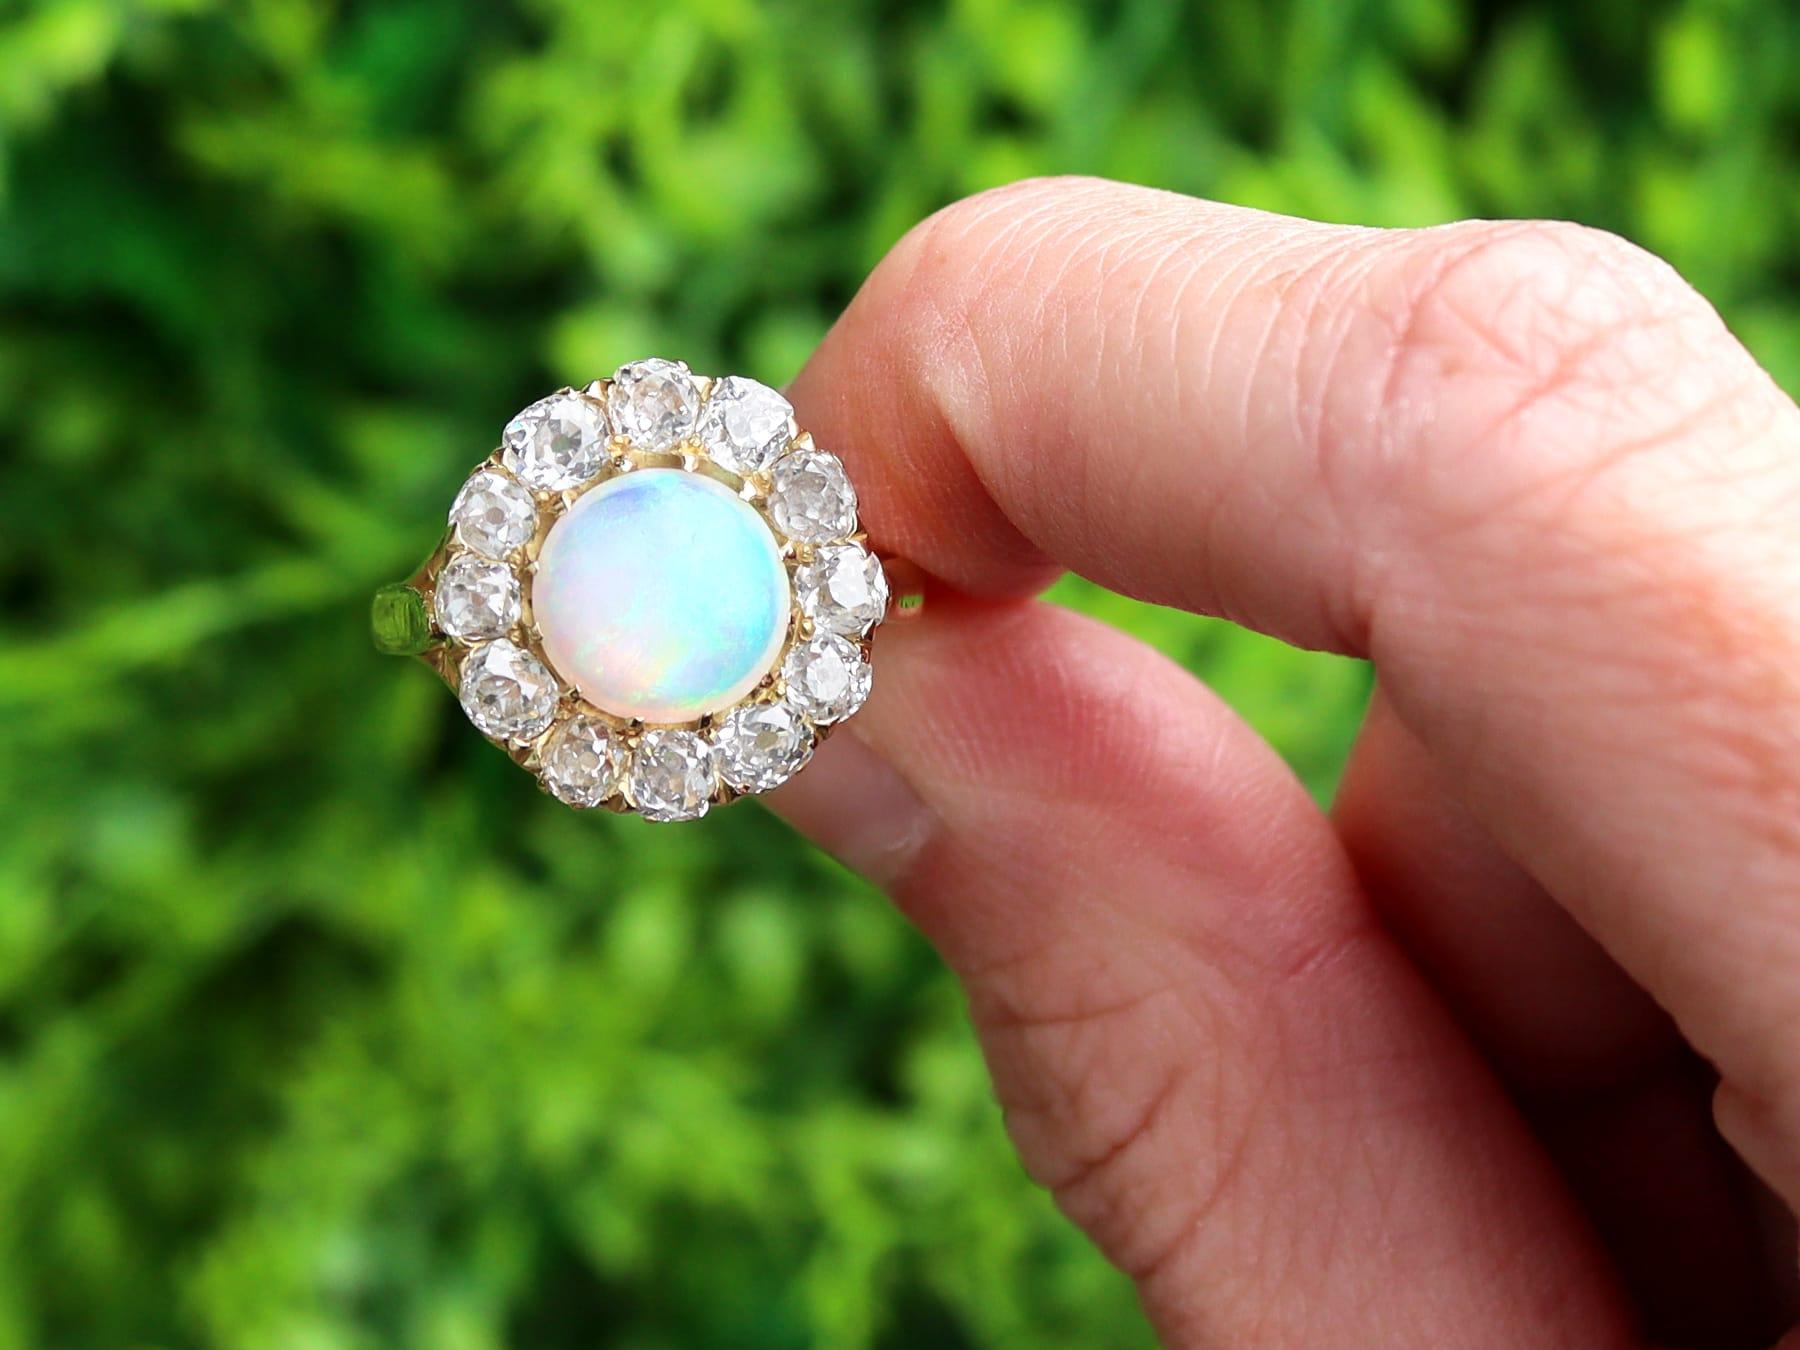 A stunning, fine and impressive antique 1.56 carat opal and 2.10 carat diamond, yellow gold dress ring; part of our diverse range of antique opal engagement rings and estate jewelry collections

This stunning, fine and impressive antique gold opal